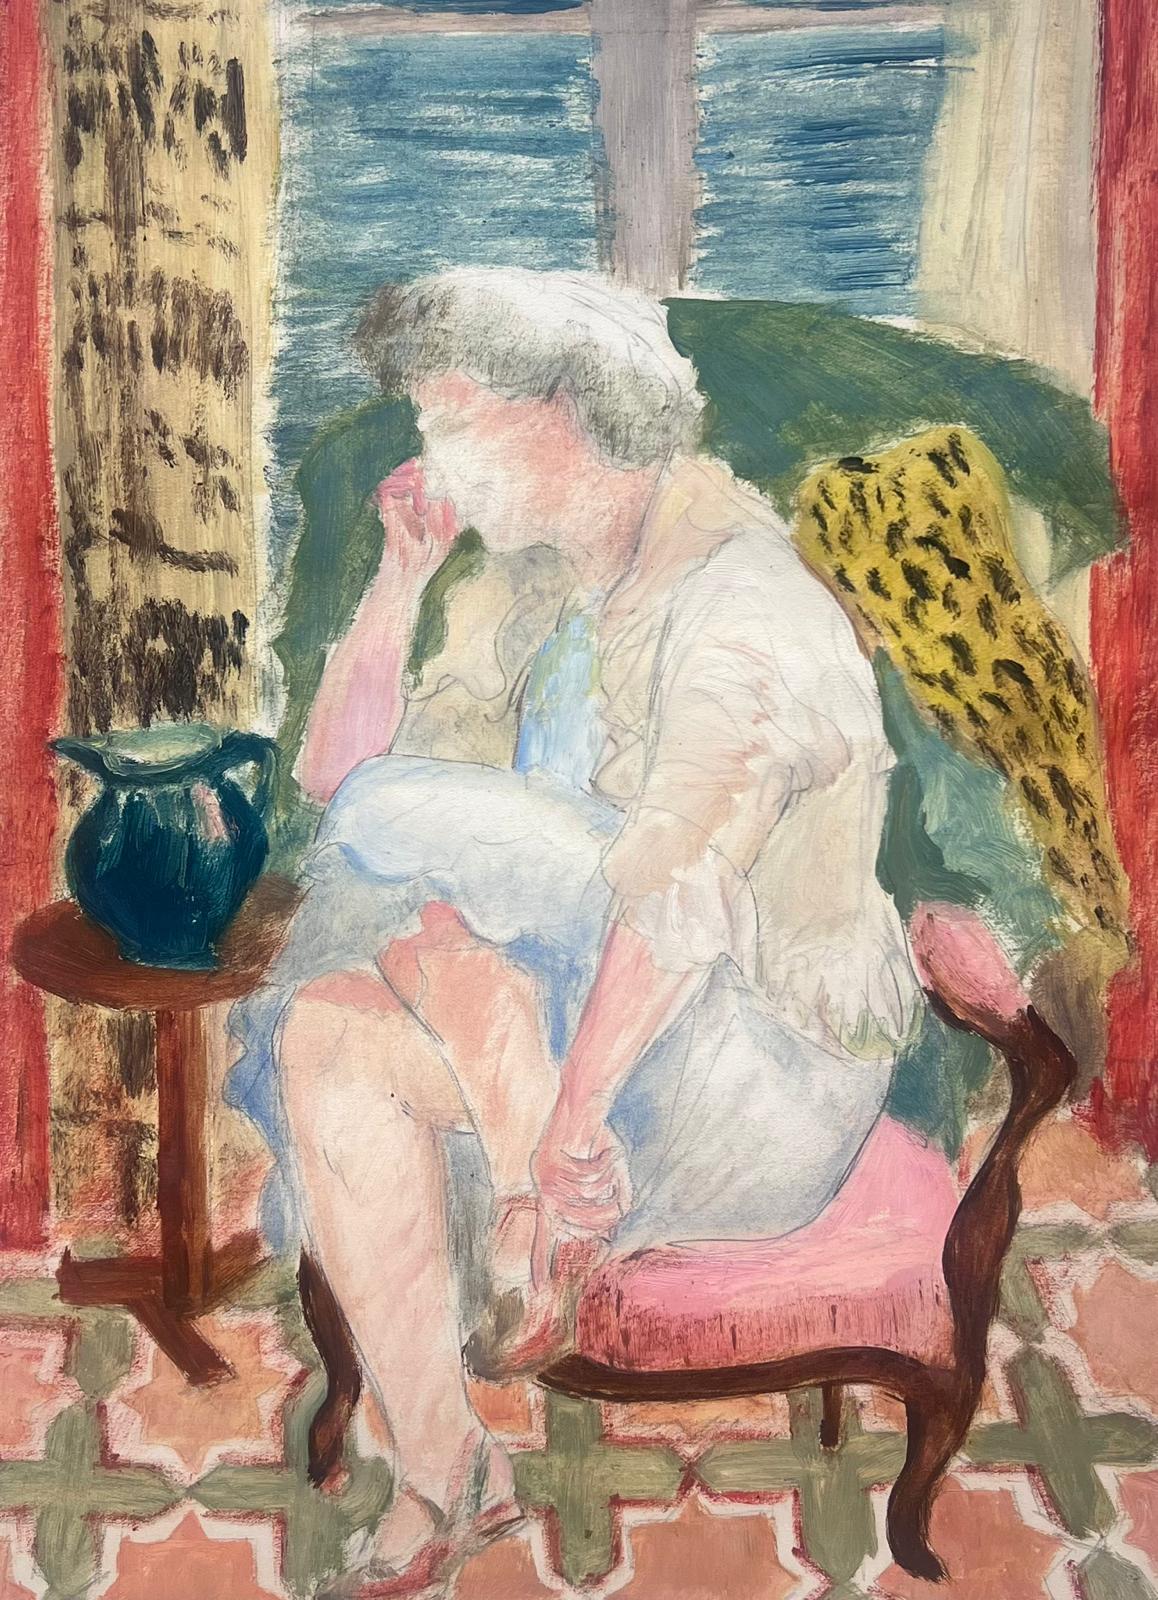 Portrait Painting Josine Vignon - 1950s French Interior Scene Lady Seated at Chair Fauvist Colors